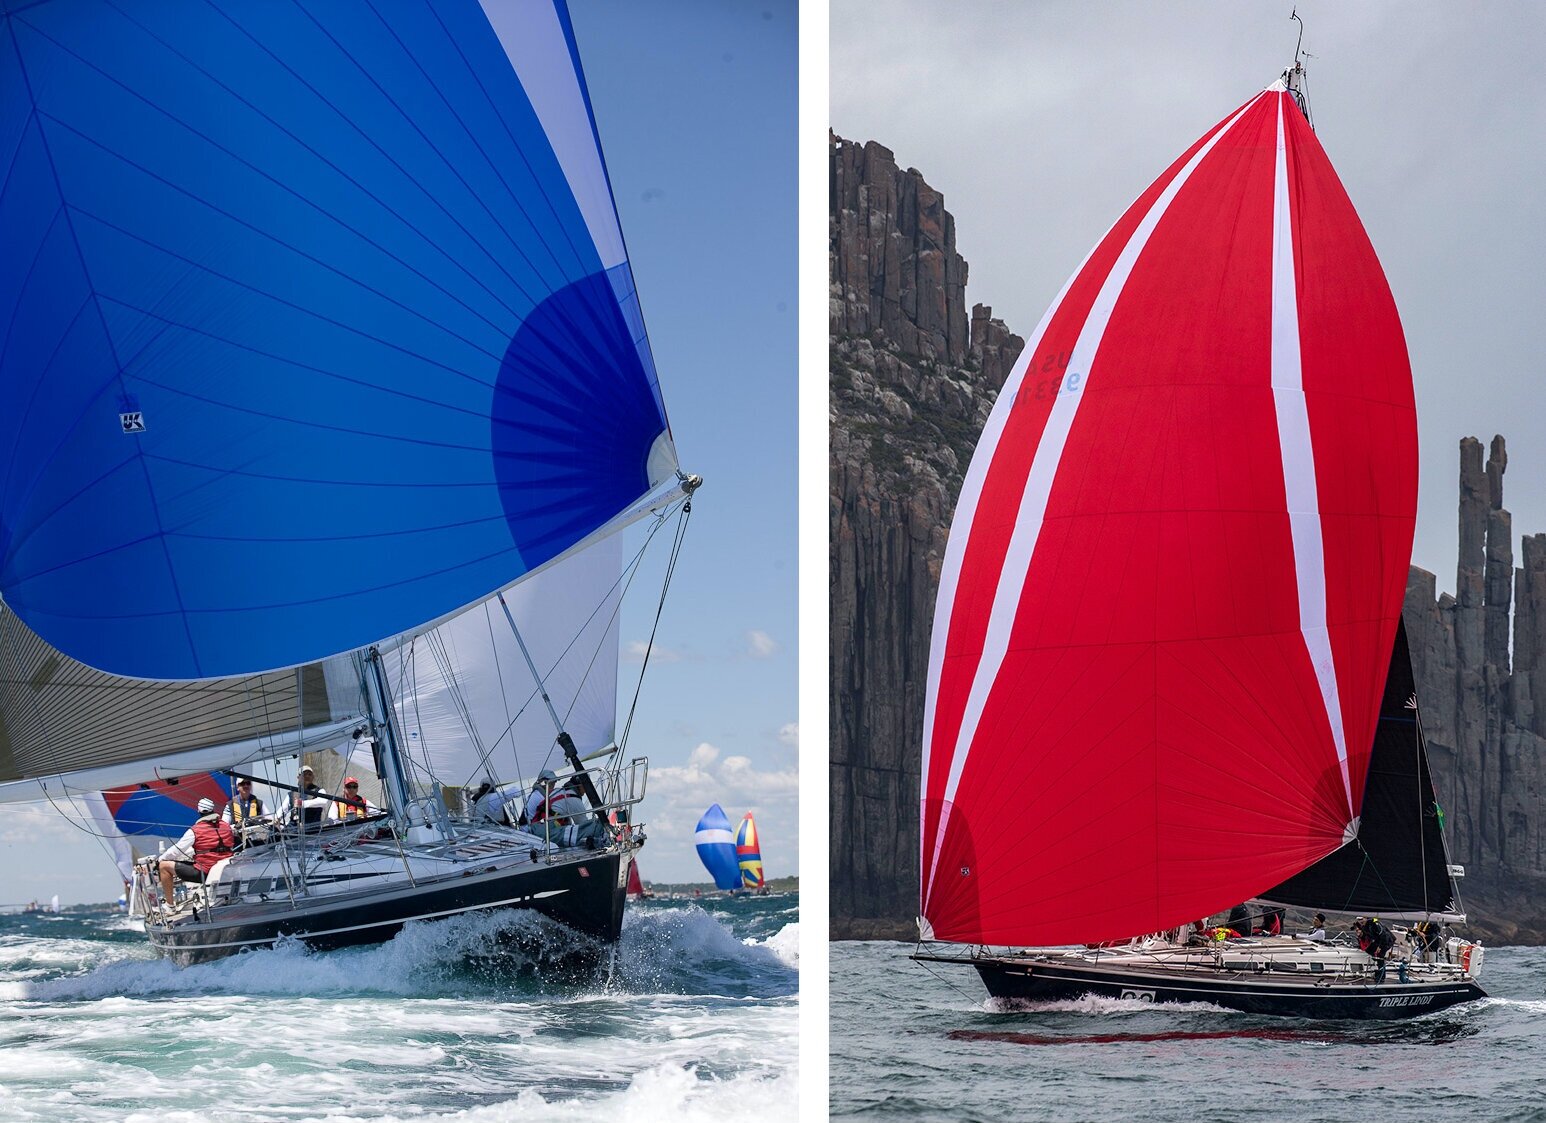 Originally equipped with symmetrical spinnakers, the Swan 44 TRIPLE LINDY changed to a full inventory of asymmetricals. After the switch, her owner said to Butch Ulmer, “Why didn’t I let you talk me into this sooner?!” The photo on the left is at the start of a Newport Bermuda Race and the photo on the right is TRIPLE LINDY entering Storm Bay in the 2016 Sydney Hobart Race.